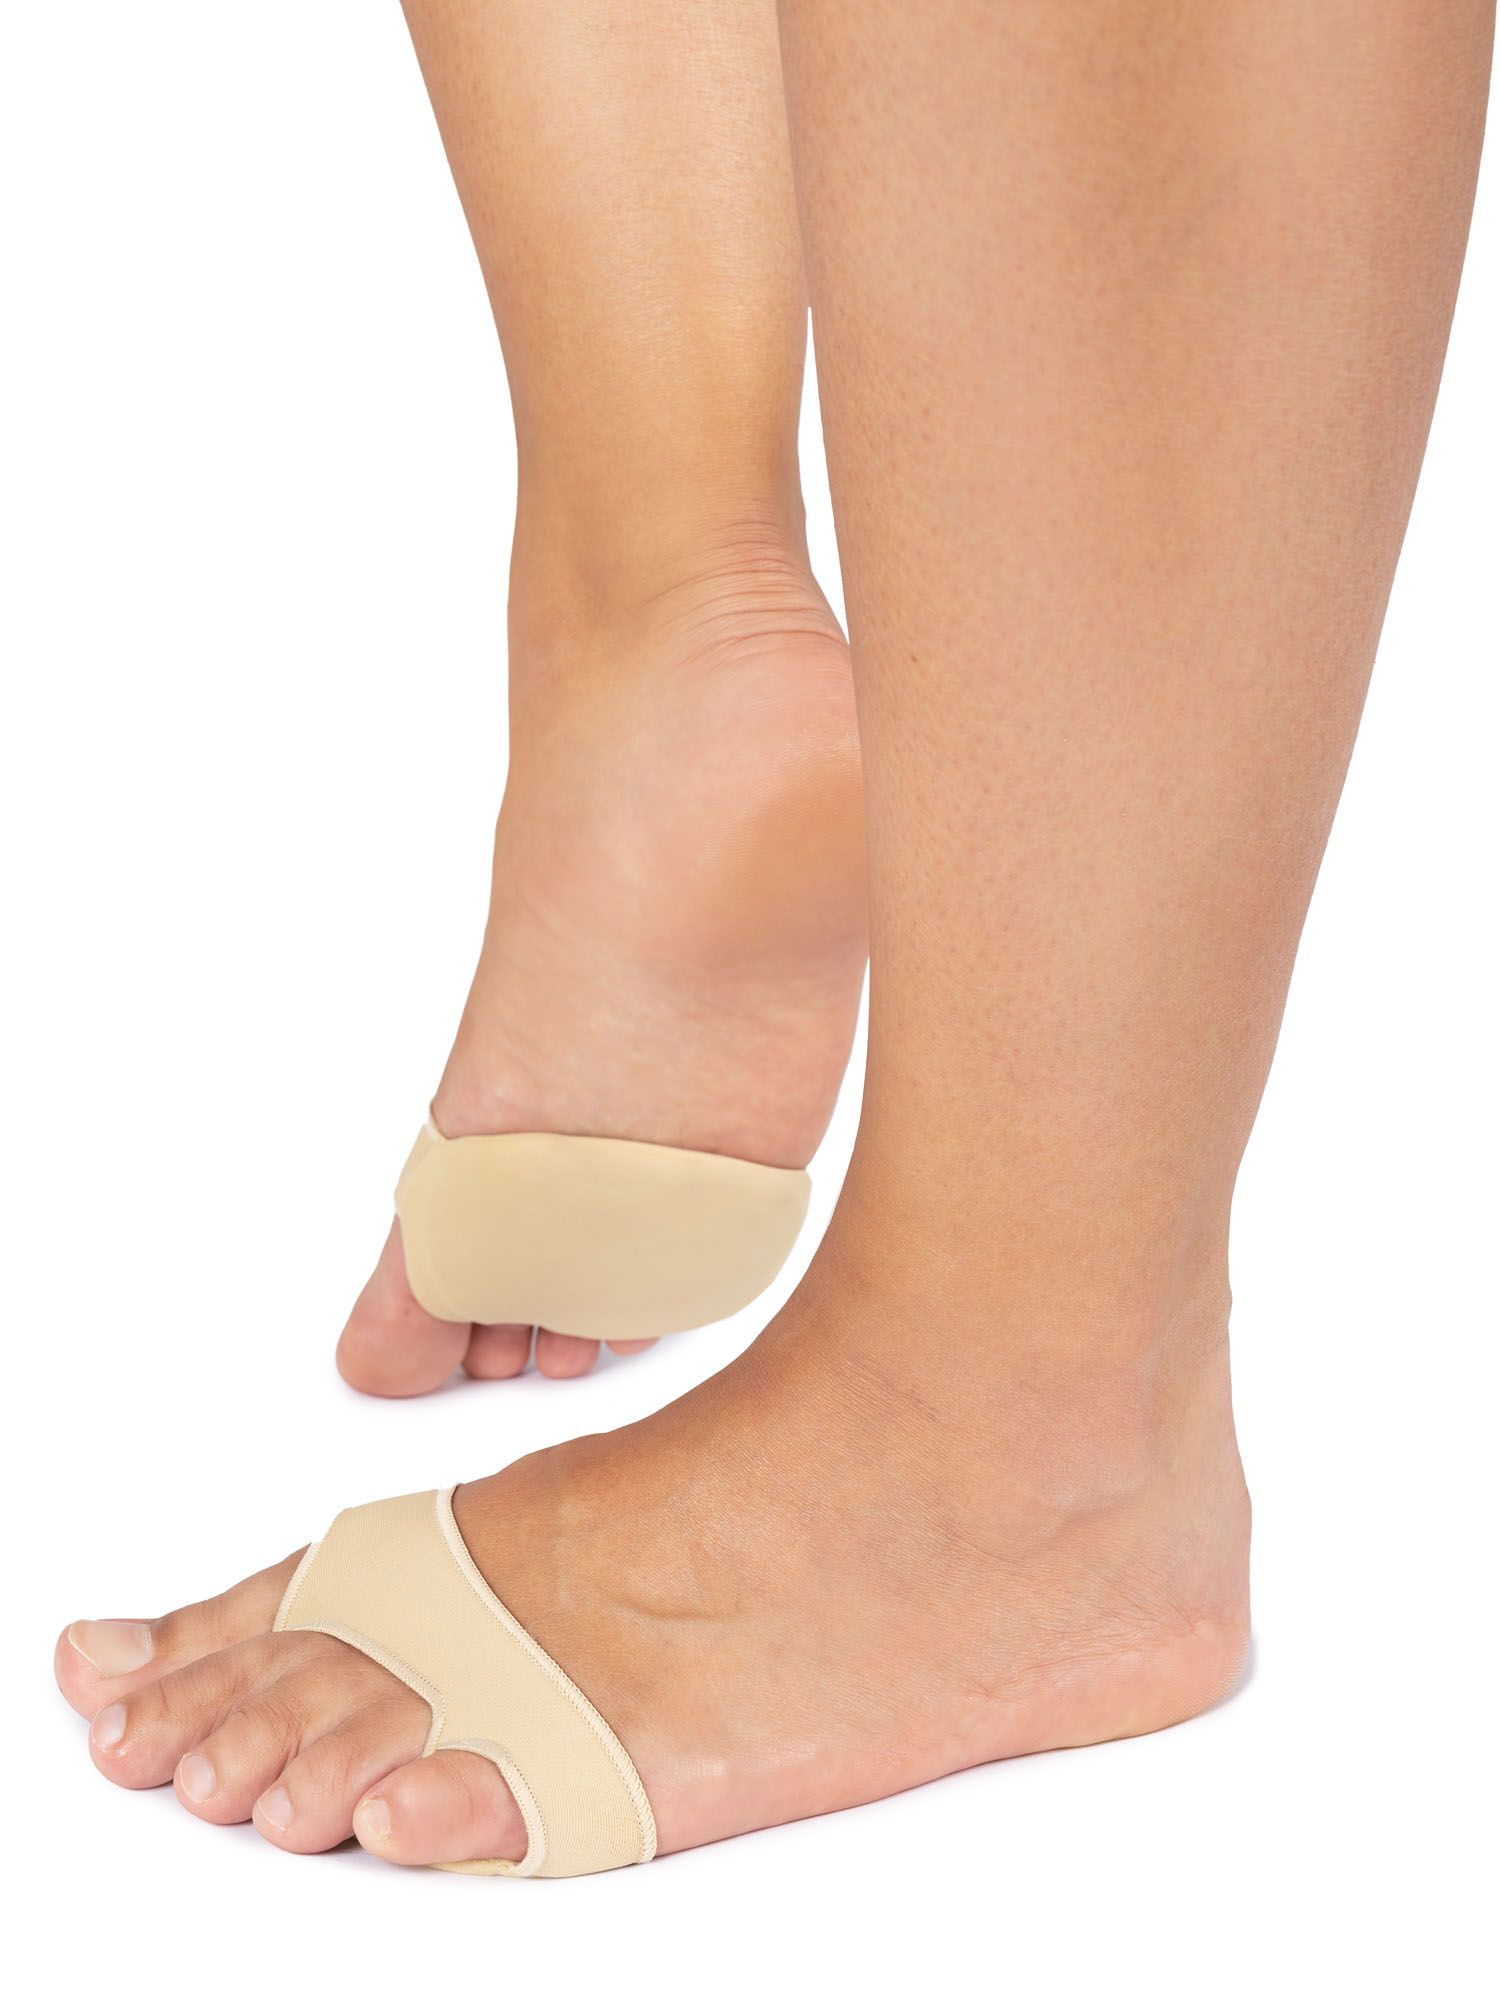 solelution metatarsal pads for sale